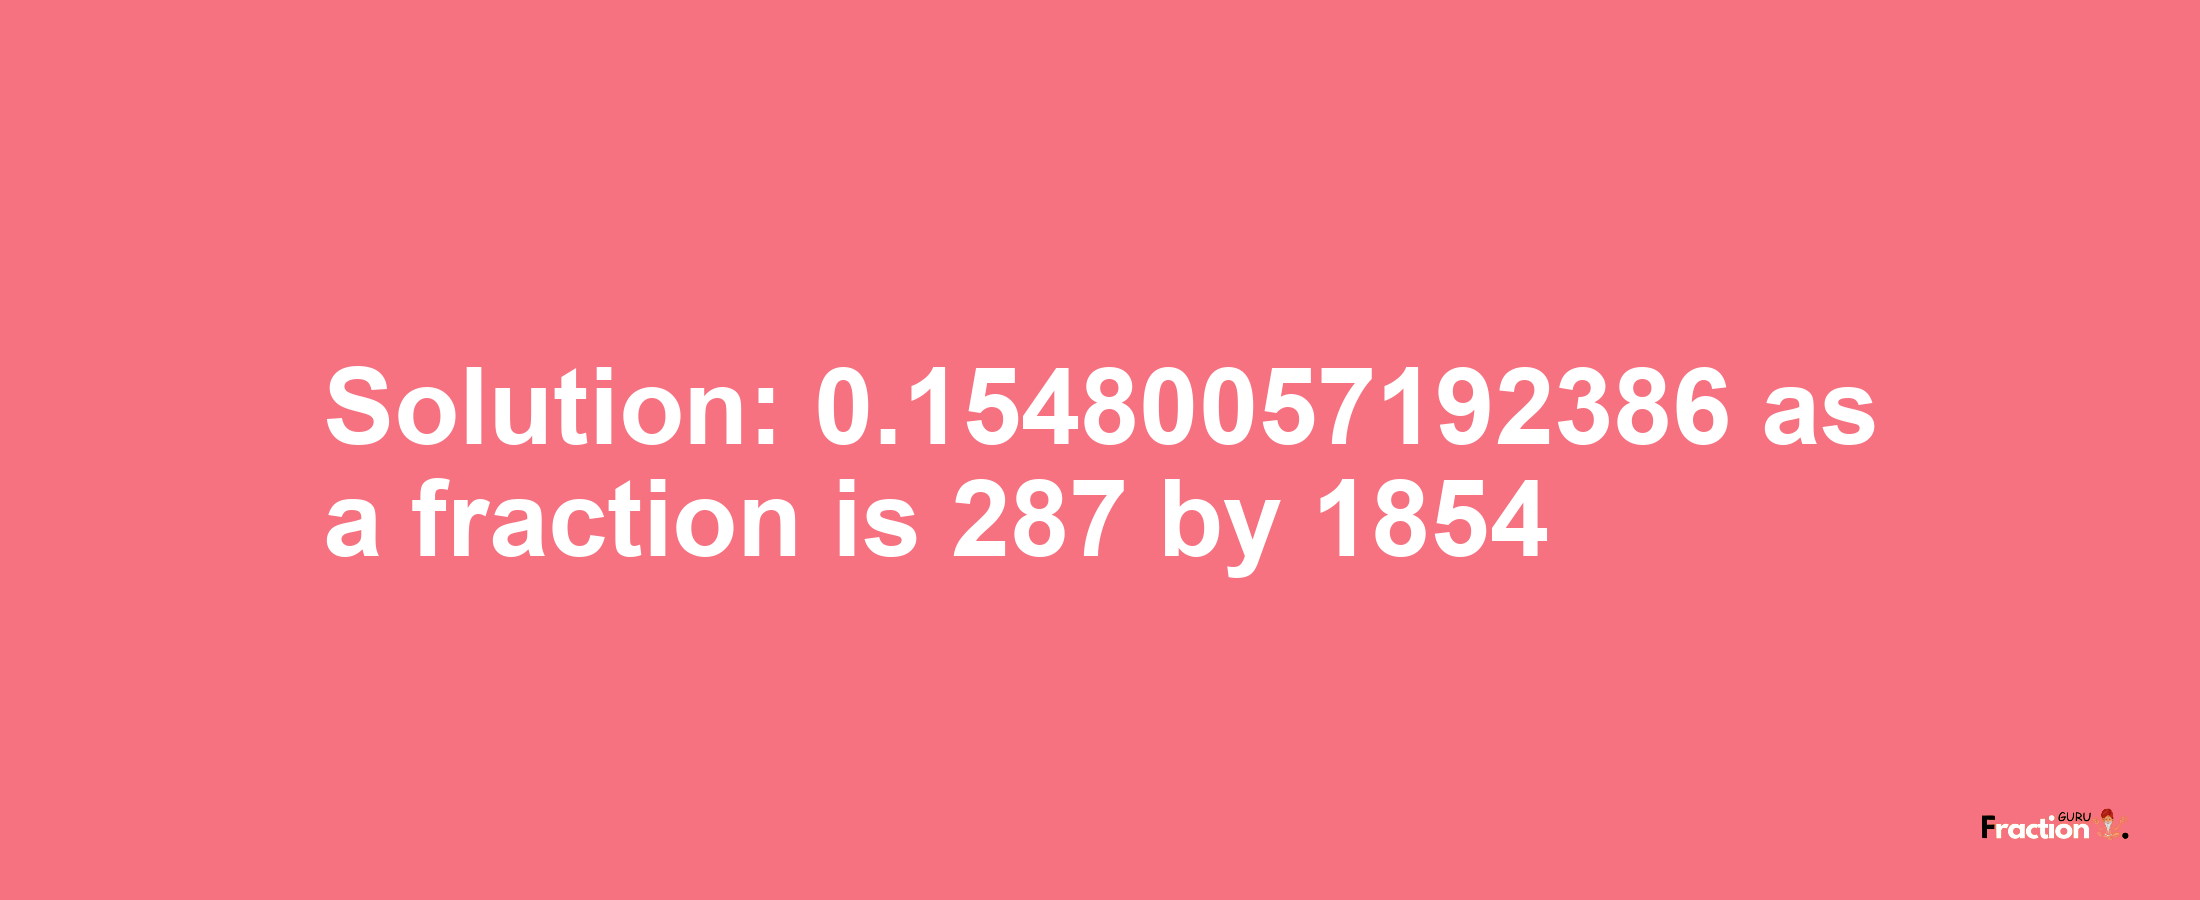 Solution:0.15480057192386 as a fraction is 287/1854